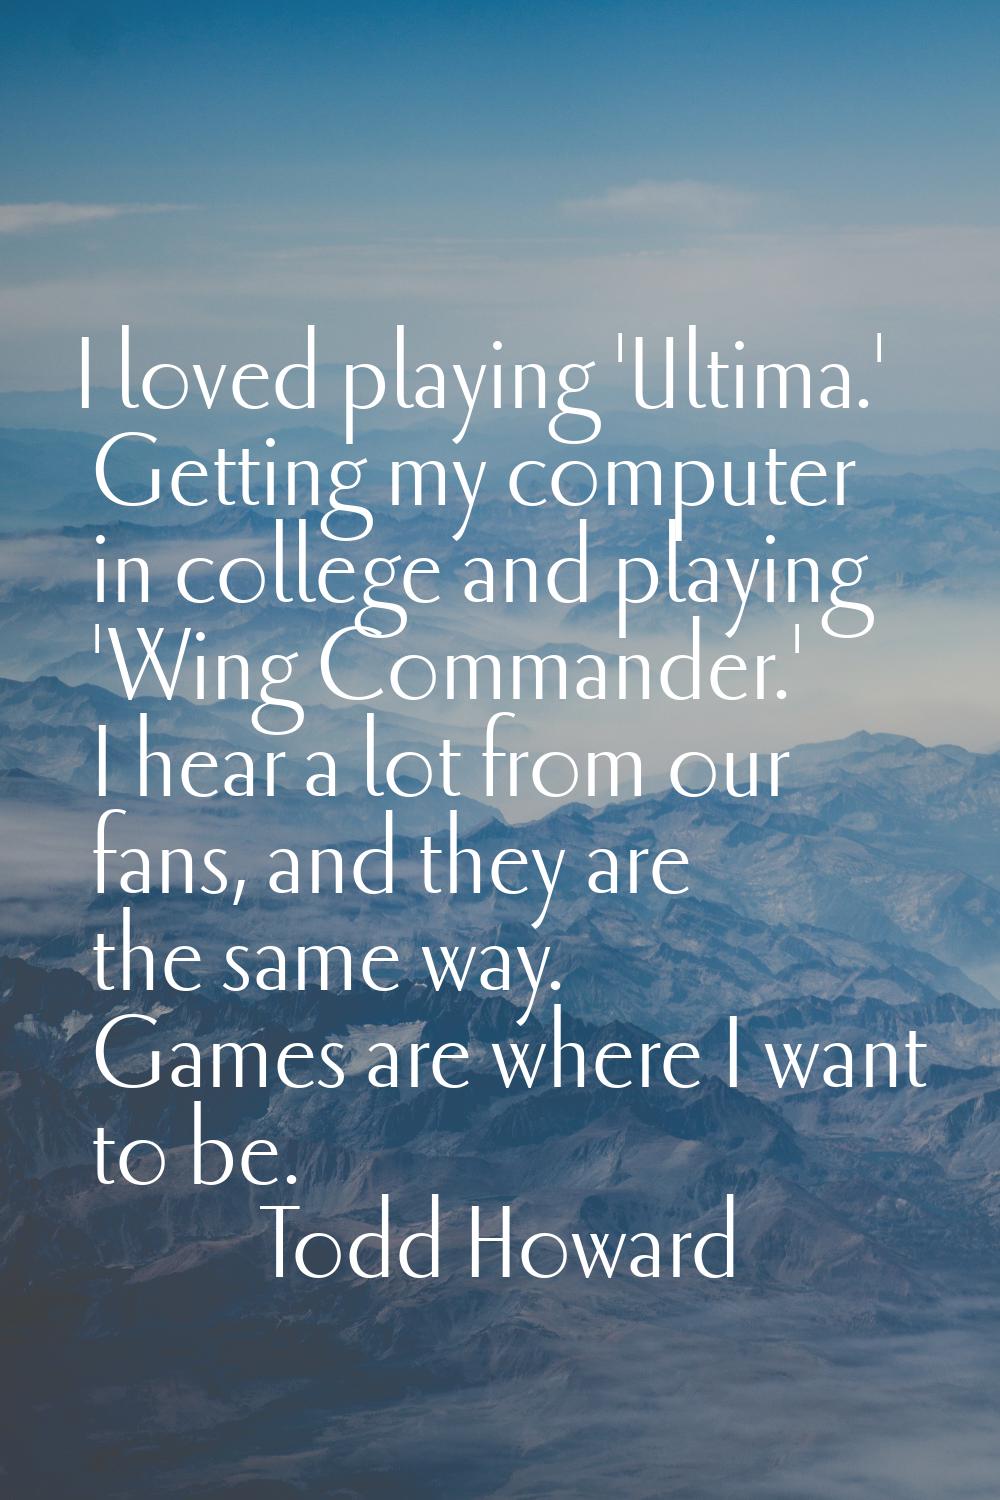 I loved playing 'Ultima.' Getting my computer in college and playing 'Wing Commander.' I hear a lot